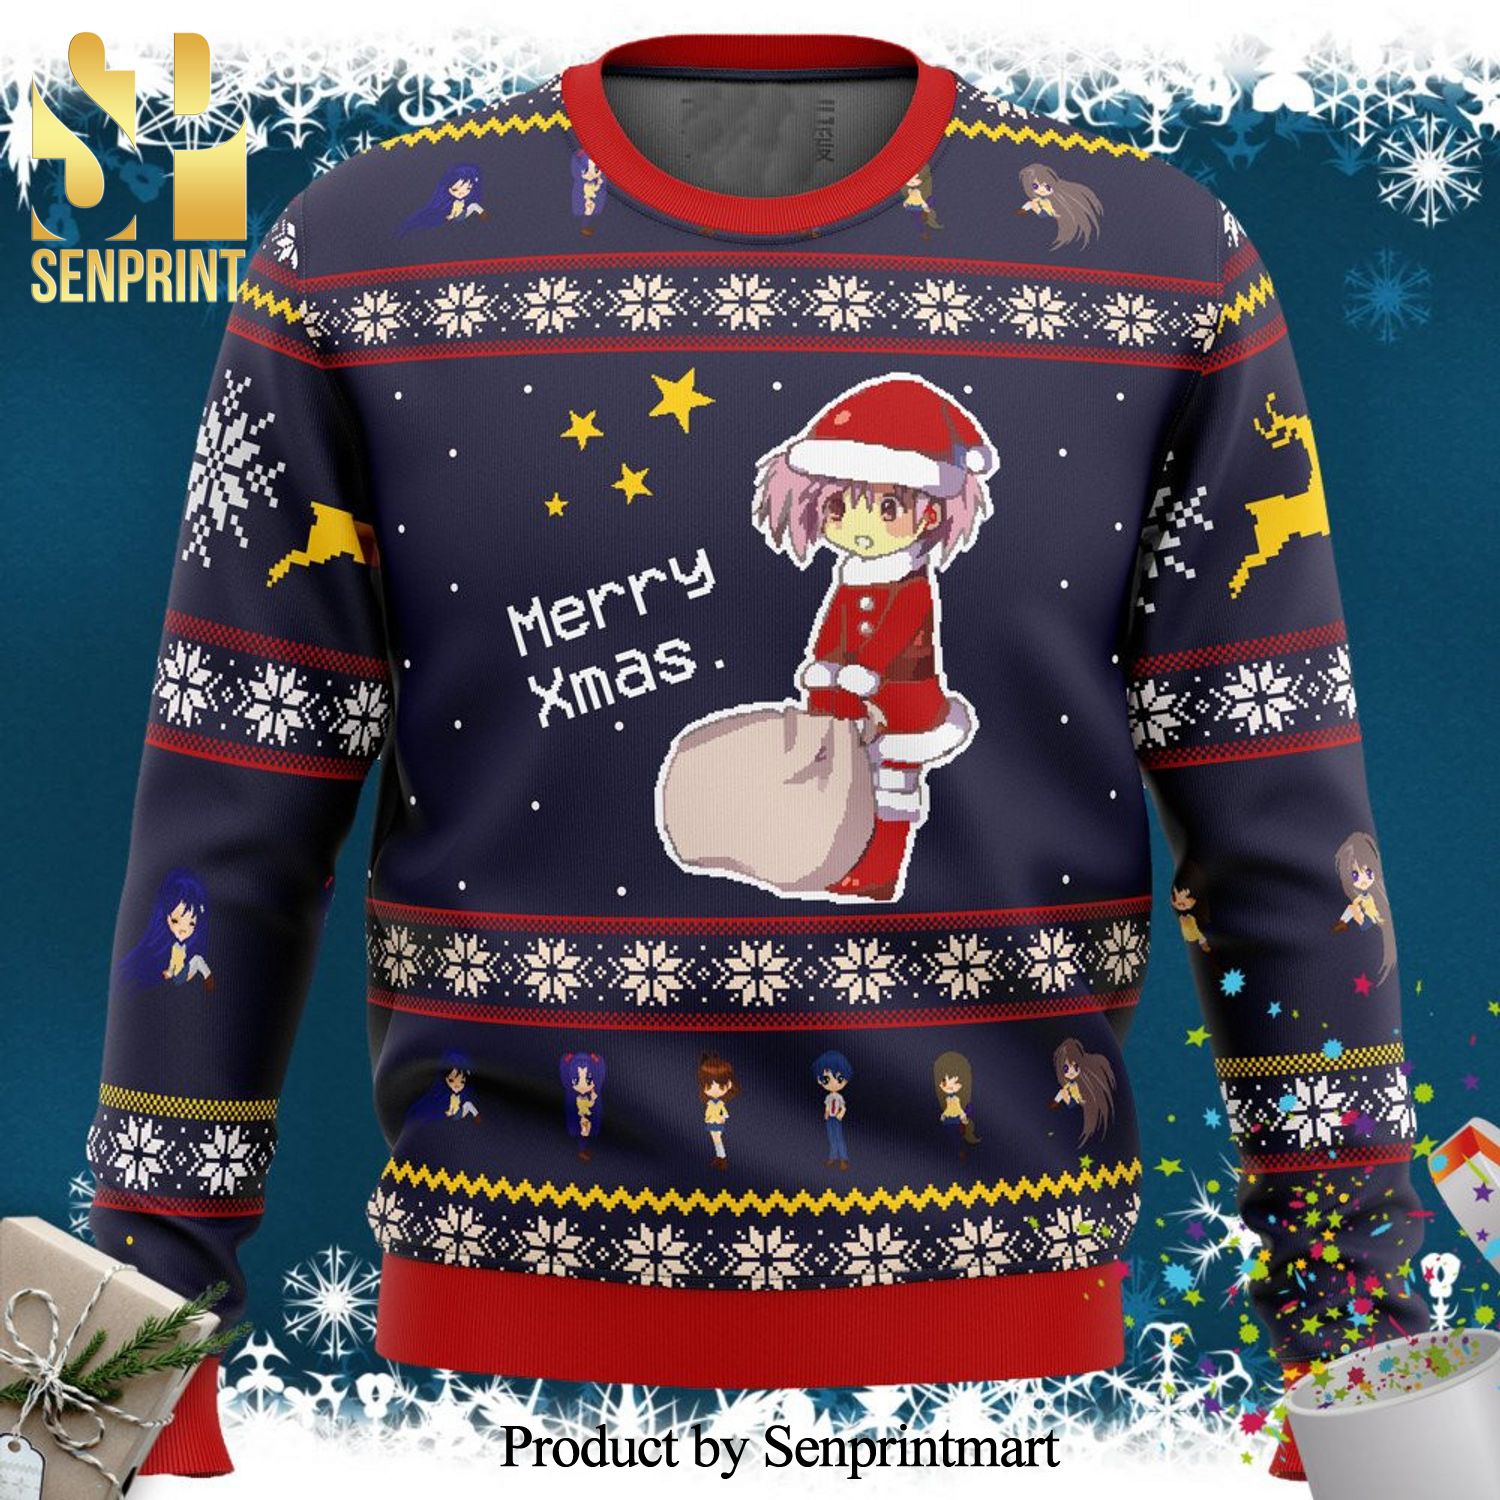 Clannad Merry Xmas Anime Knitted Ugly Christmas Sweater